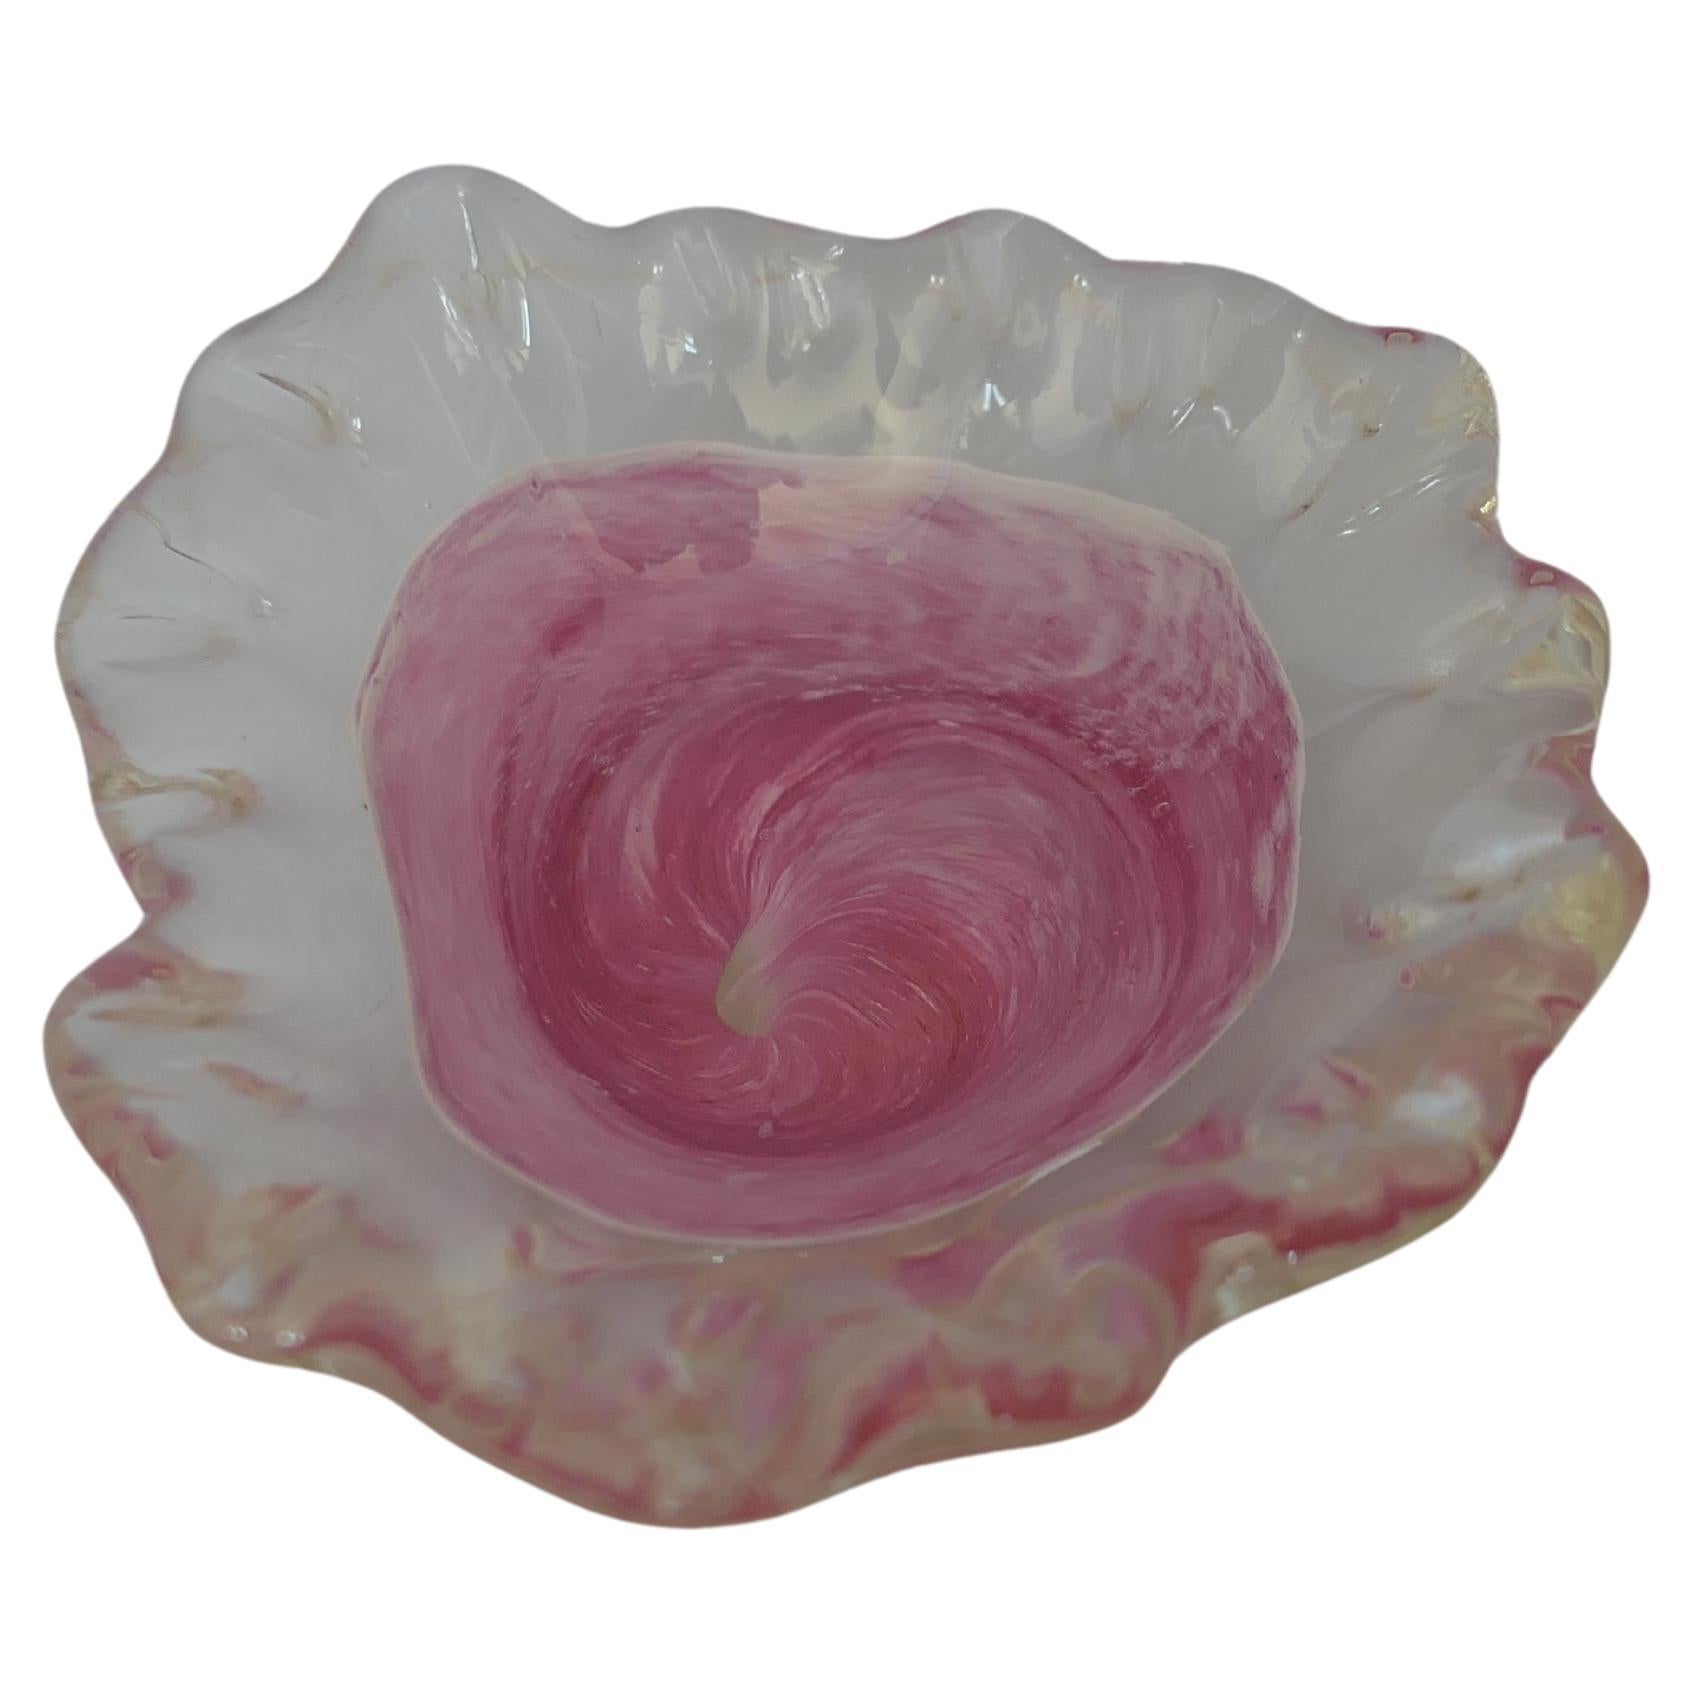 Isle of Wight Art Glass Cased Dish in Shades of Pink, with a Ruffled top    For Sale